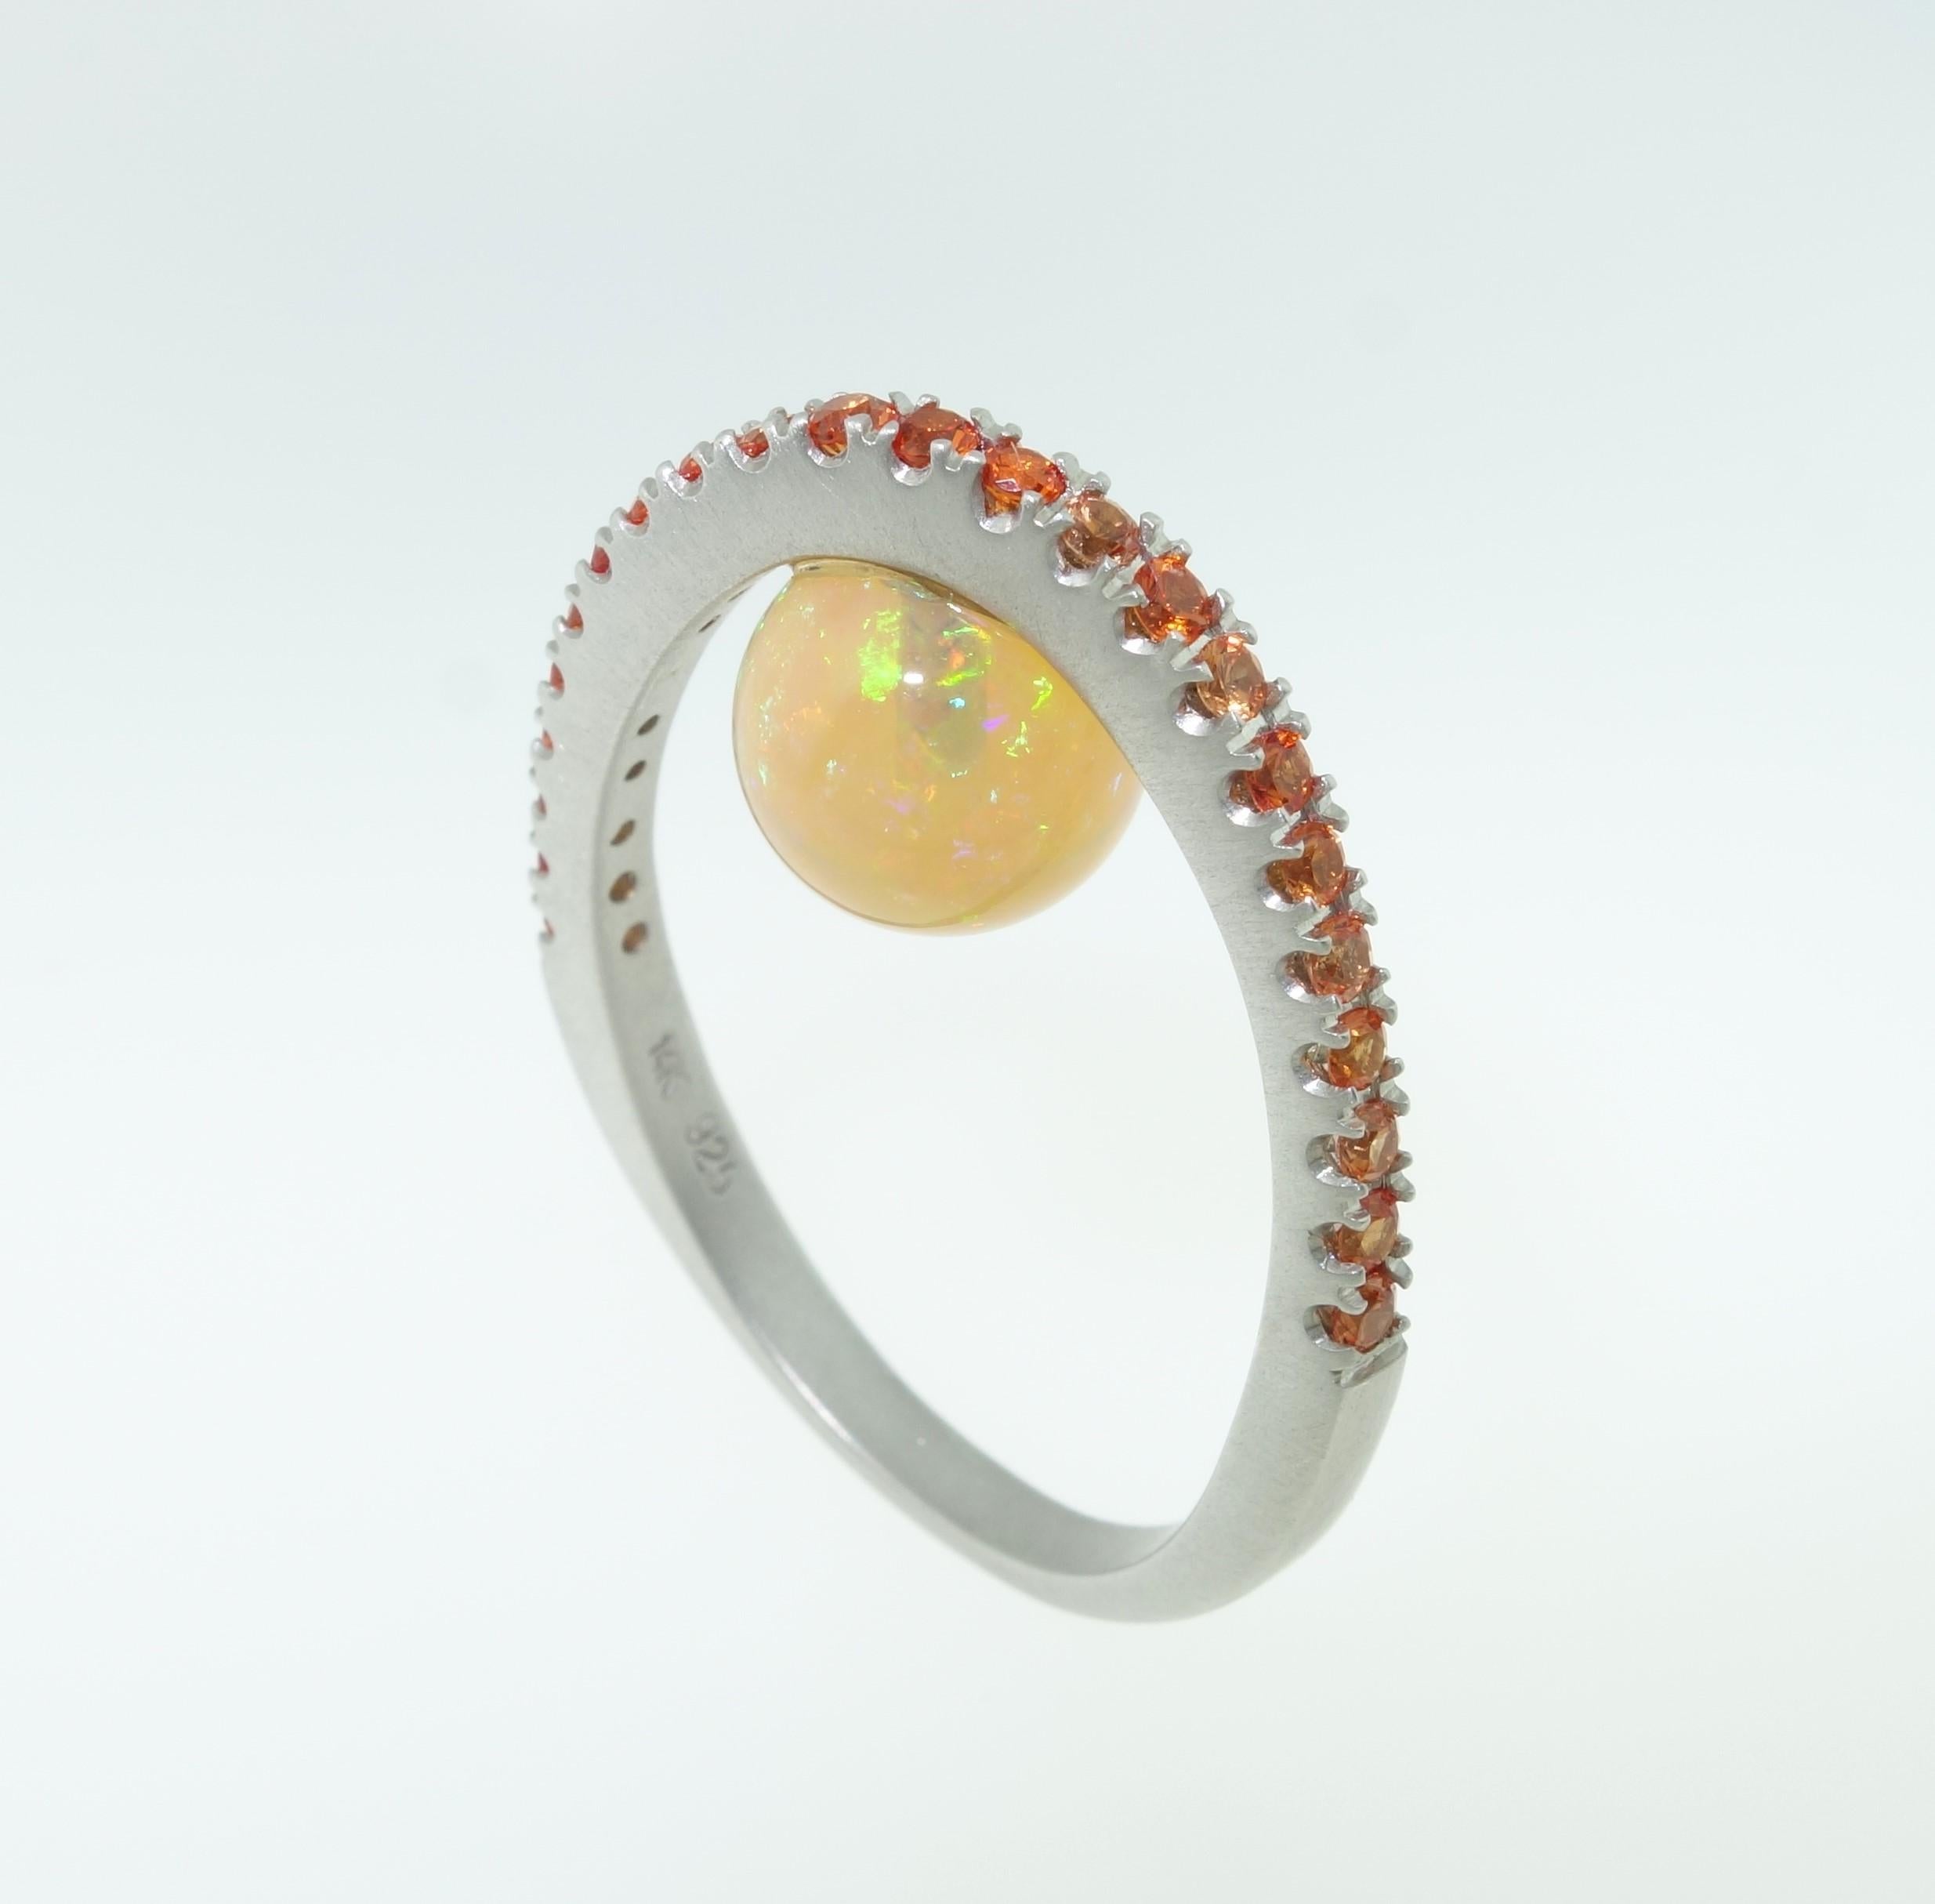 Top of ring set with Orange Sapphires, featuring a 3.10 Carat Ethiopian Opal below; Orange Sapphires approx. 0.70tctw; Sterling Silver Tarnish-resistant Rhodium mounting. Ring size 7, we offer ring re-sizing. More Beautiful in person...A Striking